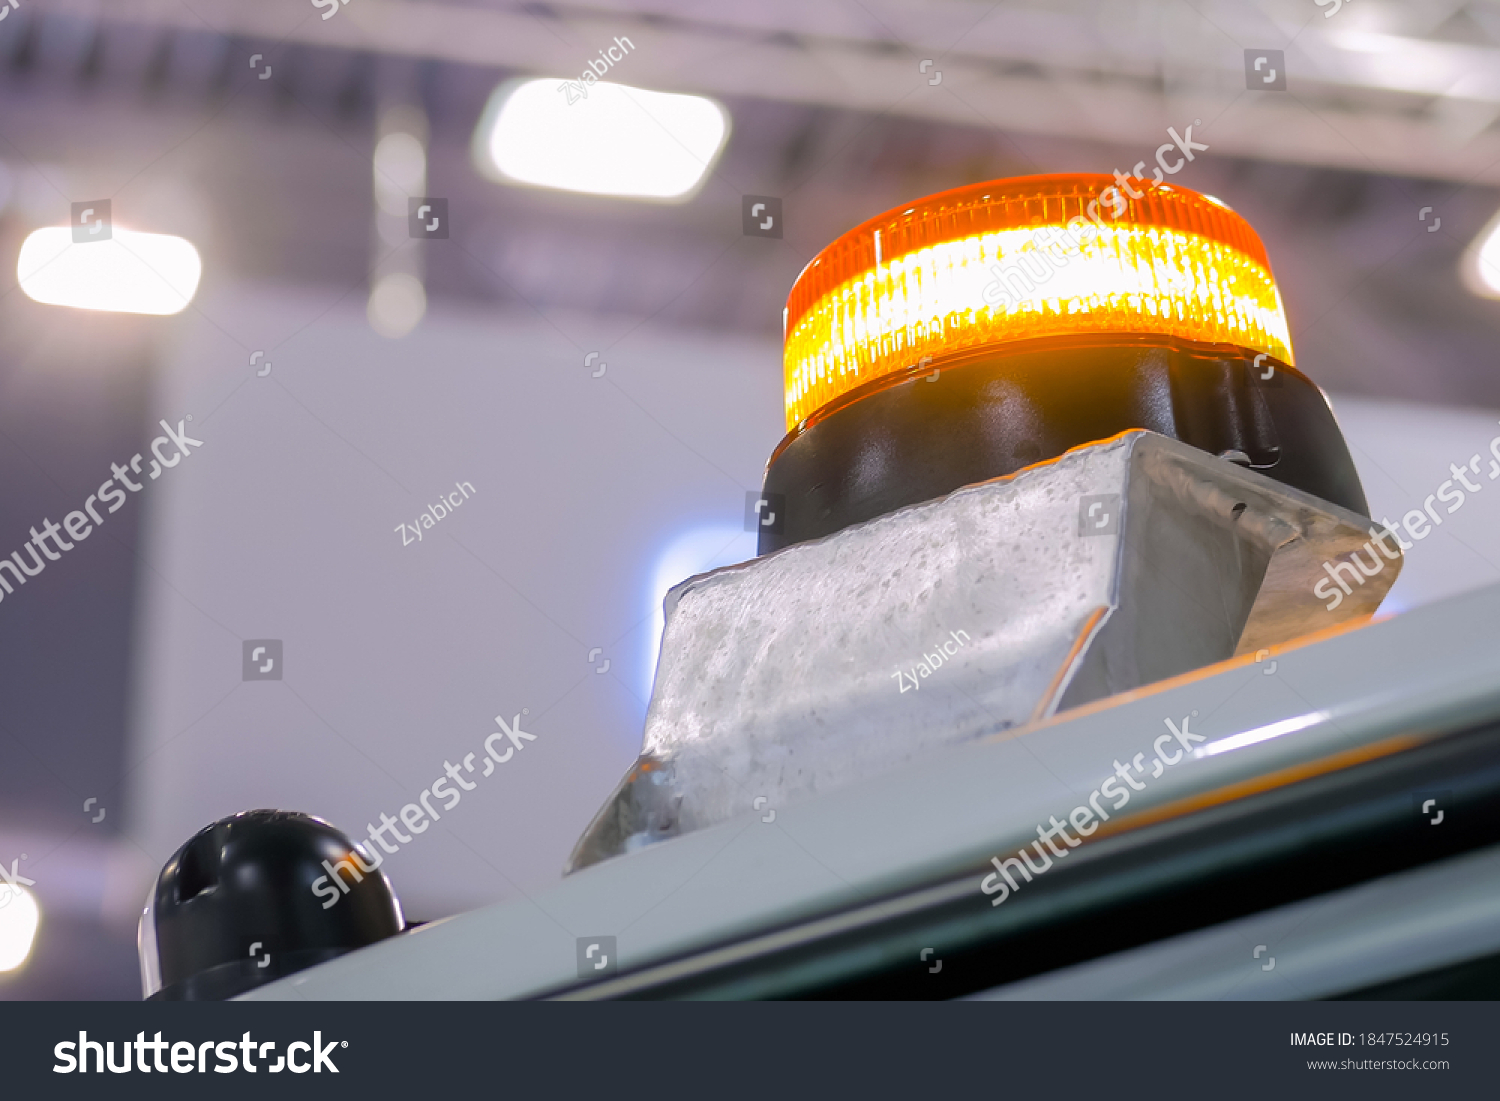 Close up of warning orange beacon flashing on roof of emergency, support and service vehicle. Danger, legal, alert light, attention and hazard concept #1847524915